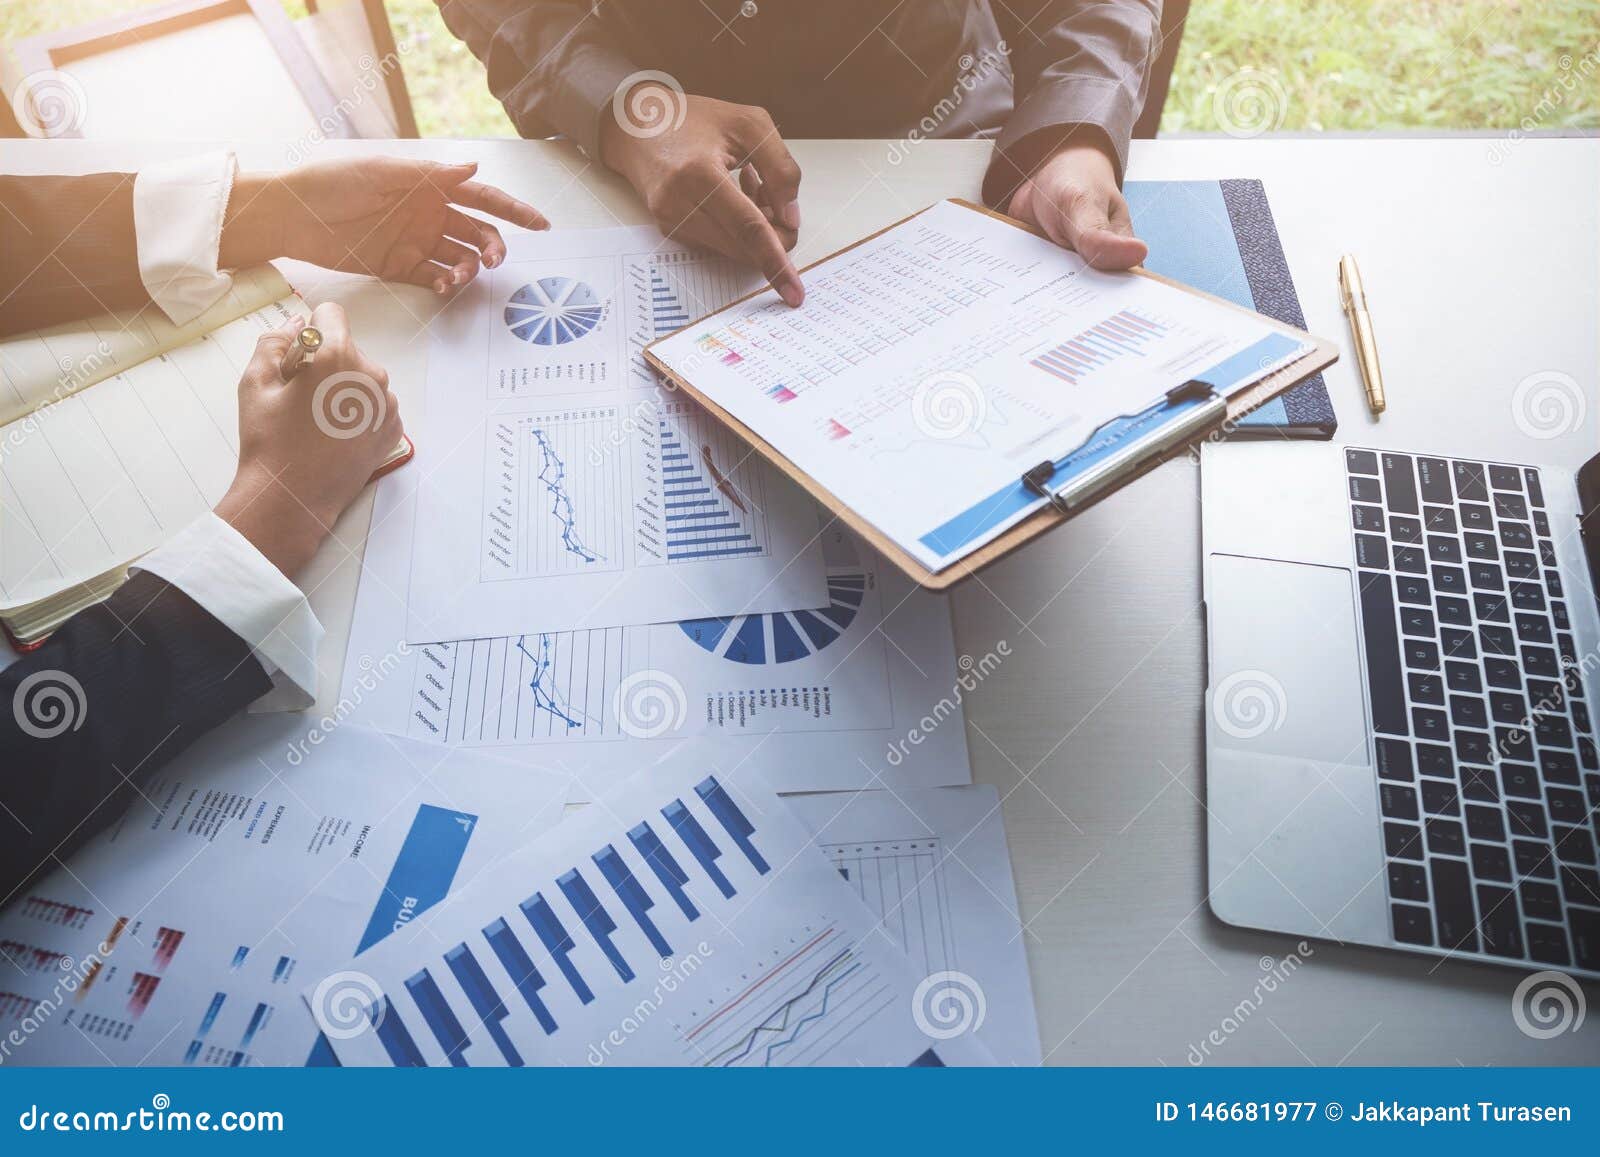 business people meeting planning budget and cost, strategy analysis concept